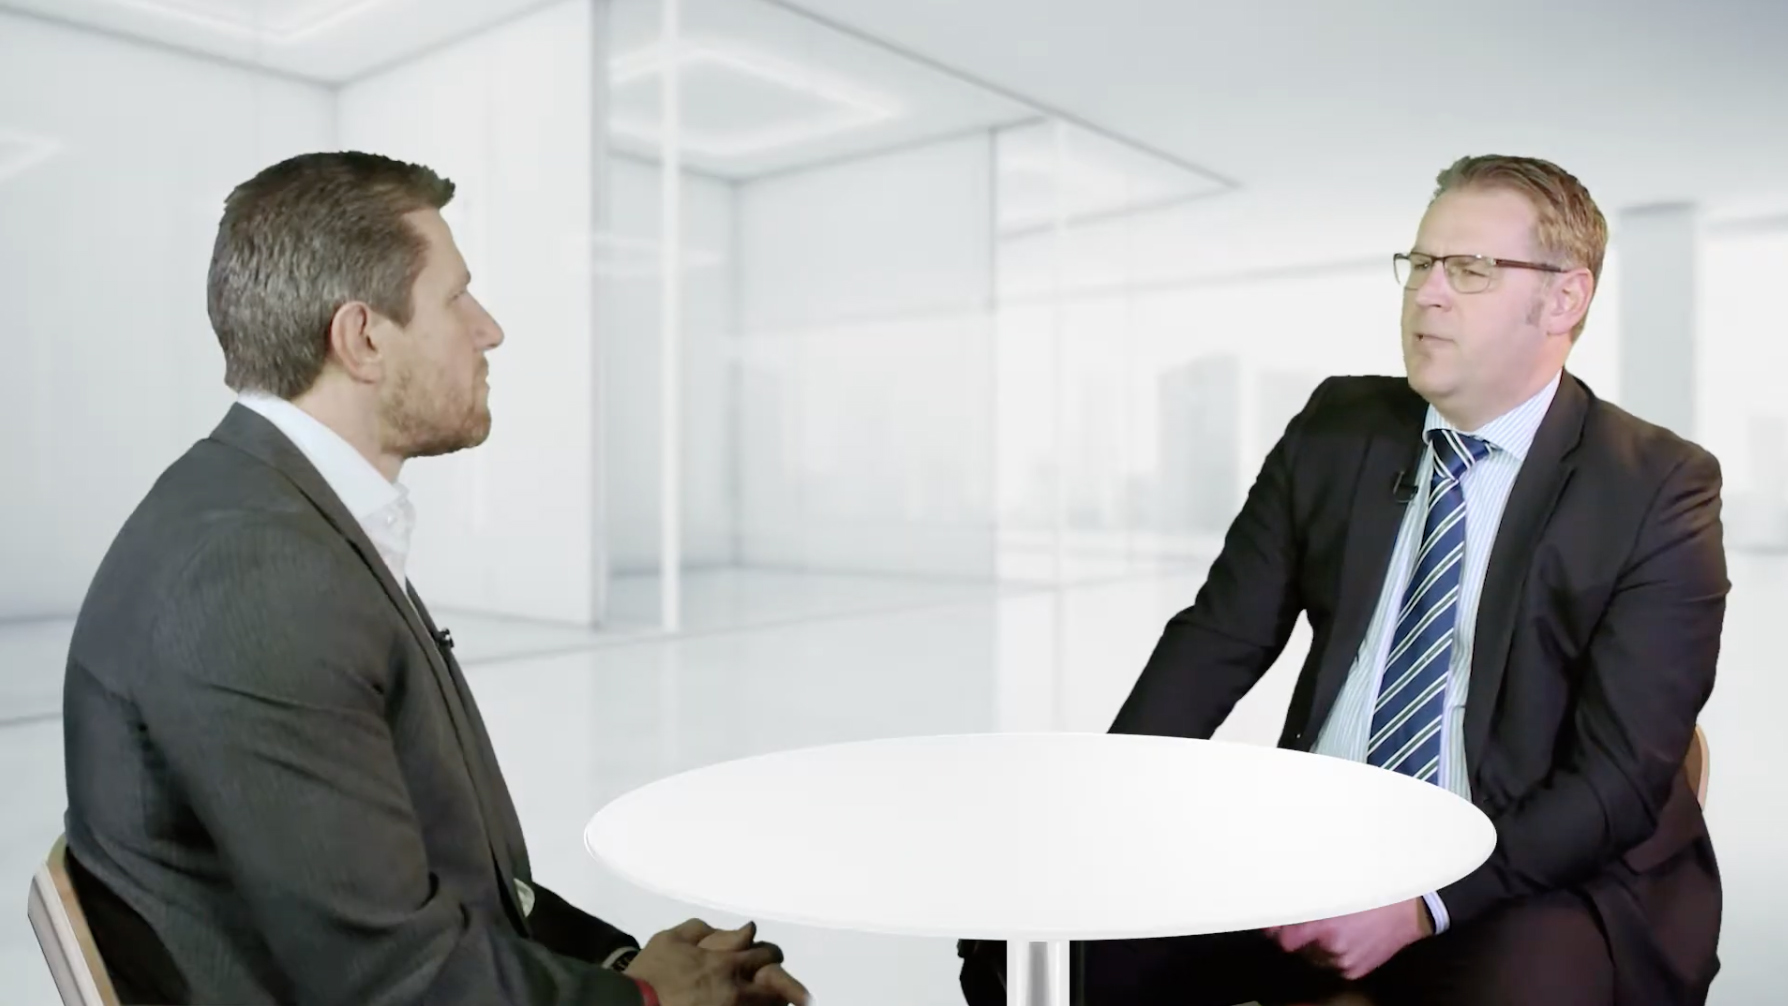 Two business men talking in a glass room